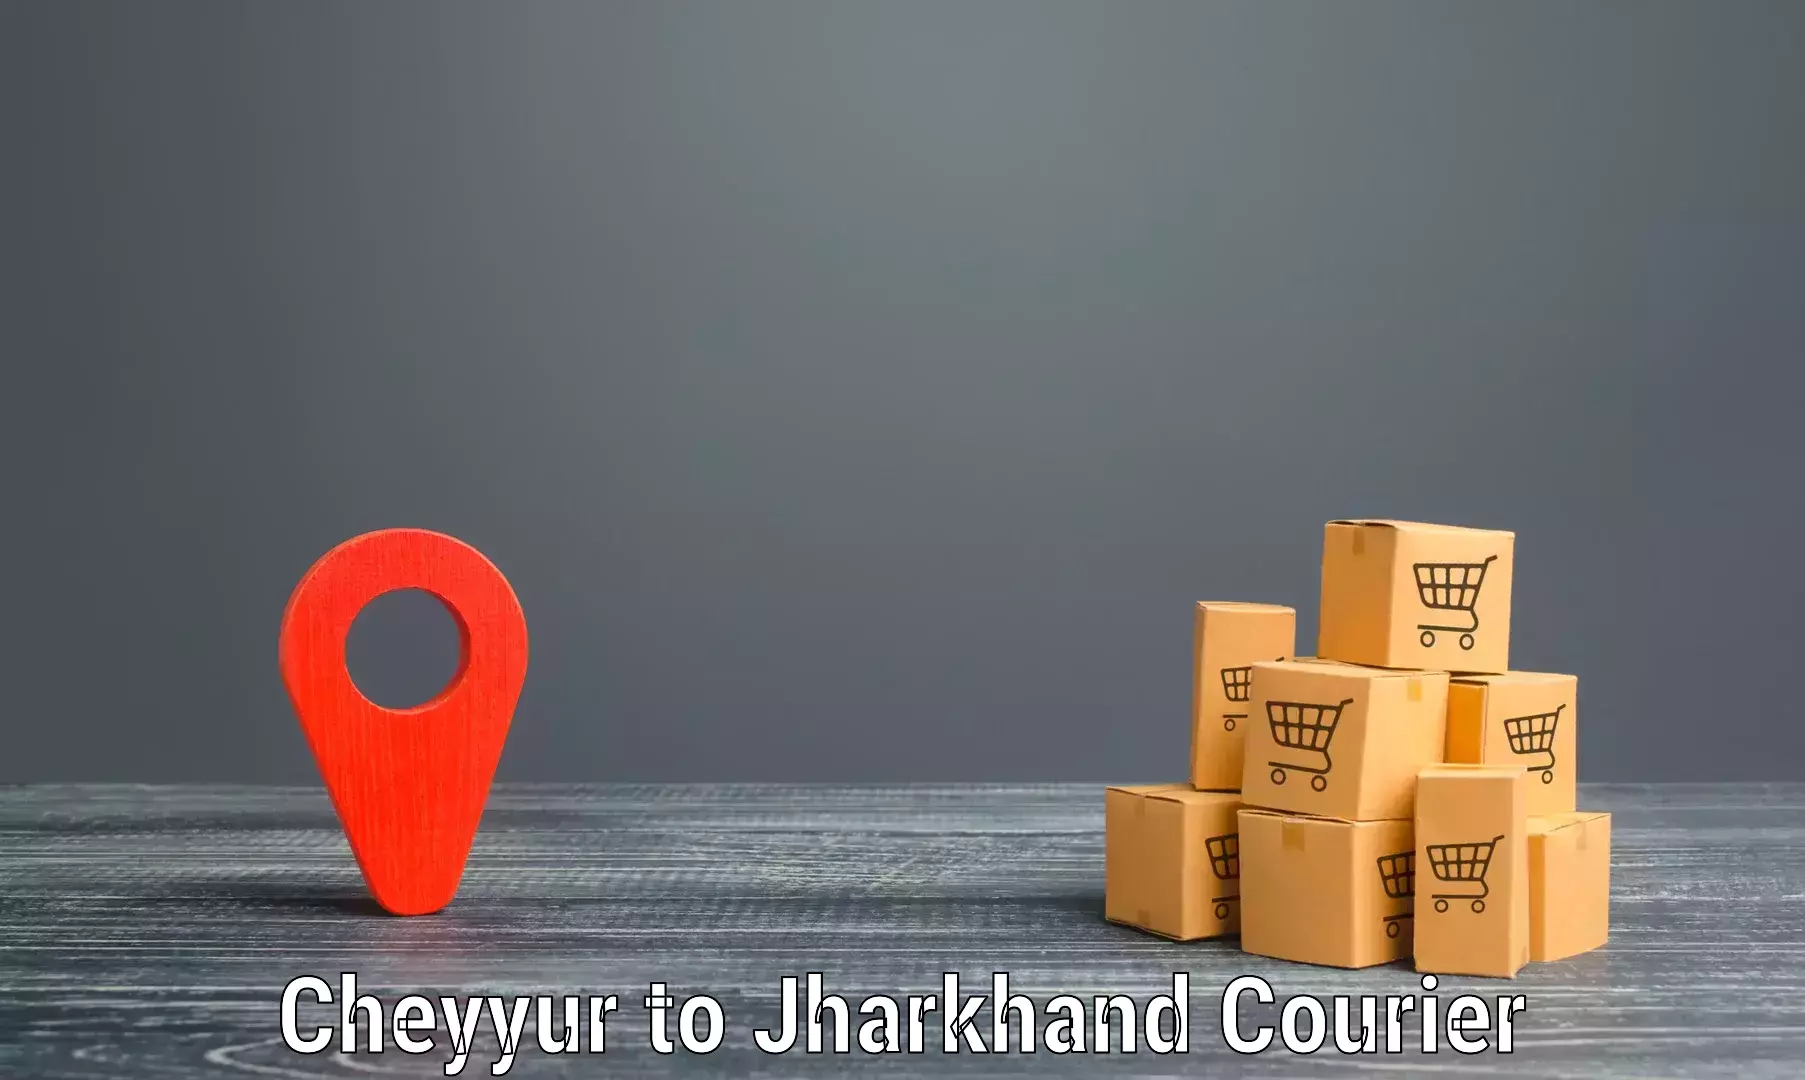 Efficient package consolidation Cheyyur to Jamshedpur